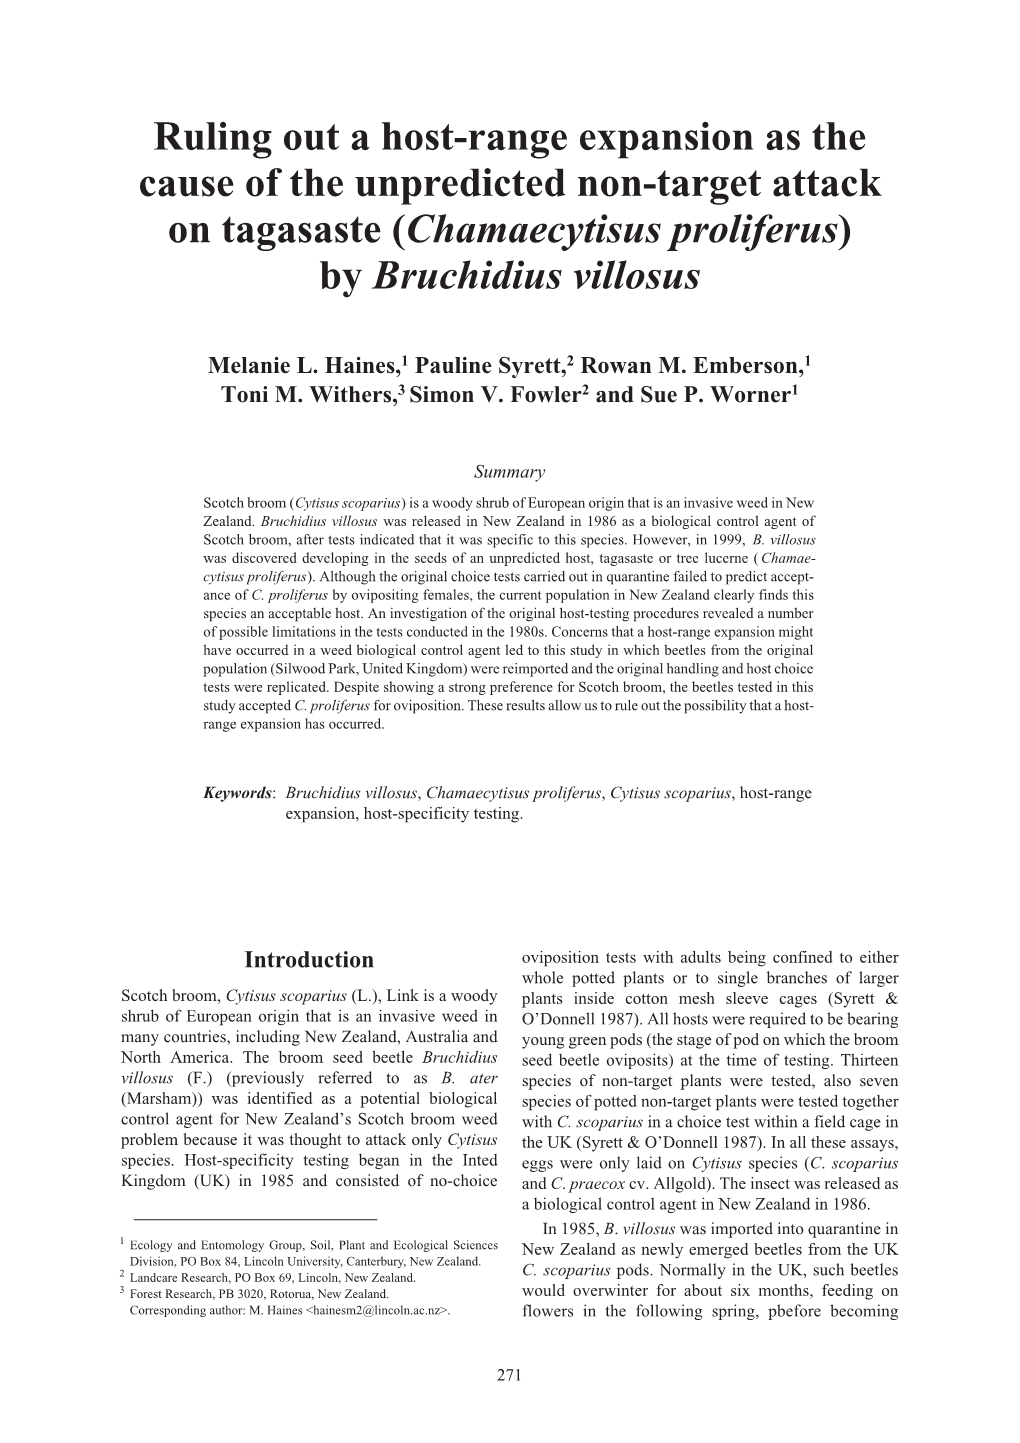 Ruling out a Host-Range Expansion As the Cause of the Unpredicted Non-Target Attack on Tagasaste (Chamaecytisus Proliferus) by Bruchidius Villosus